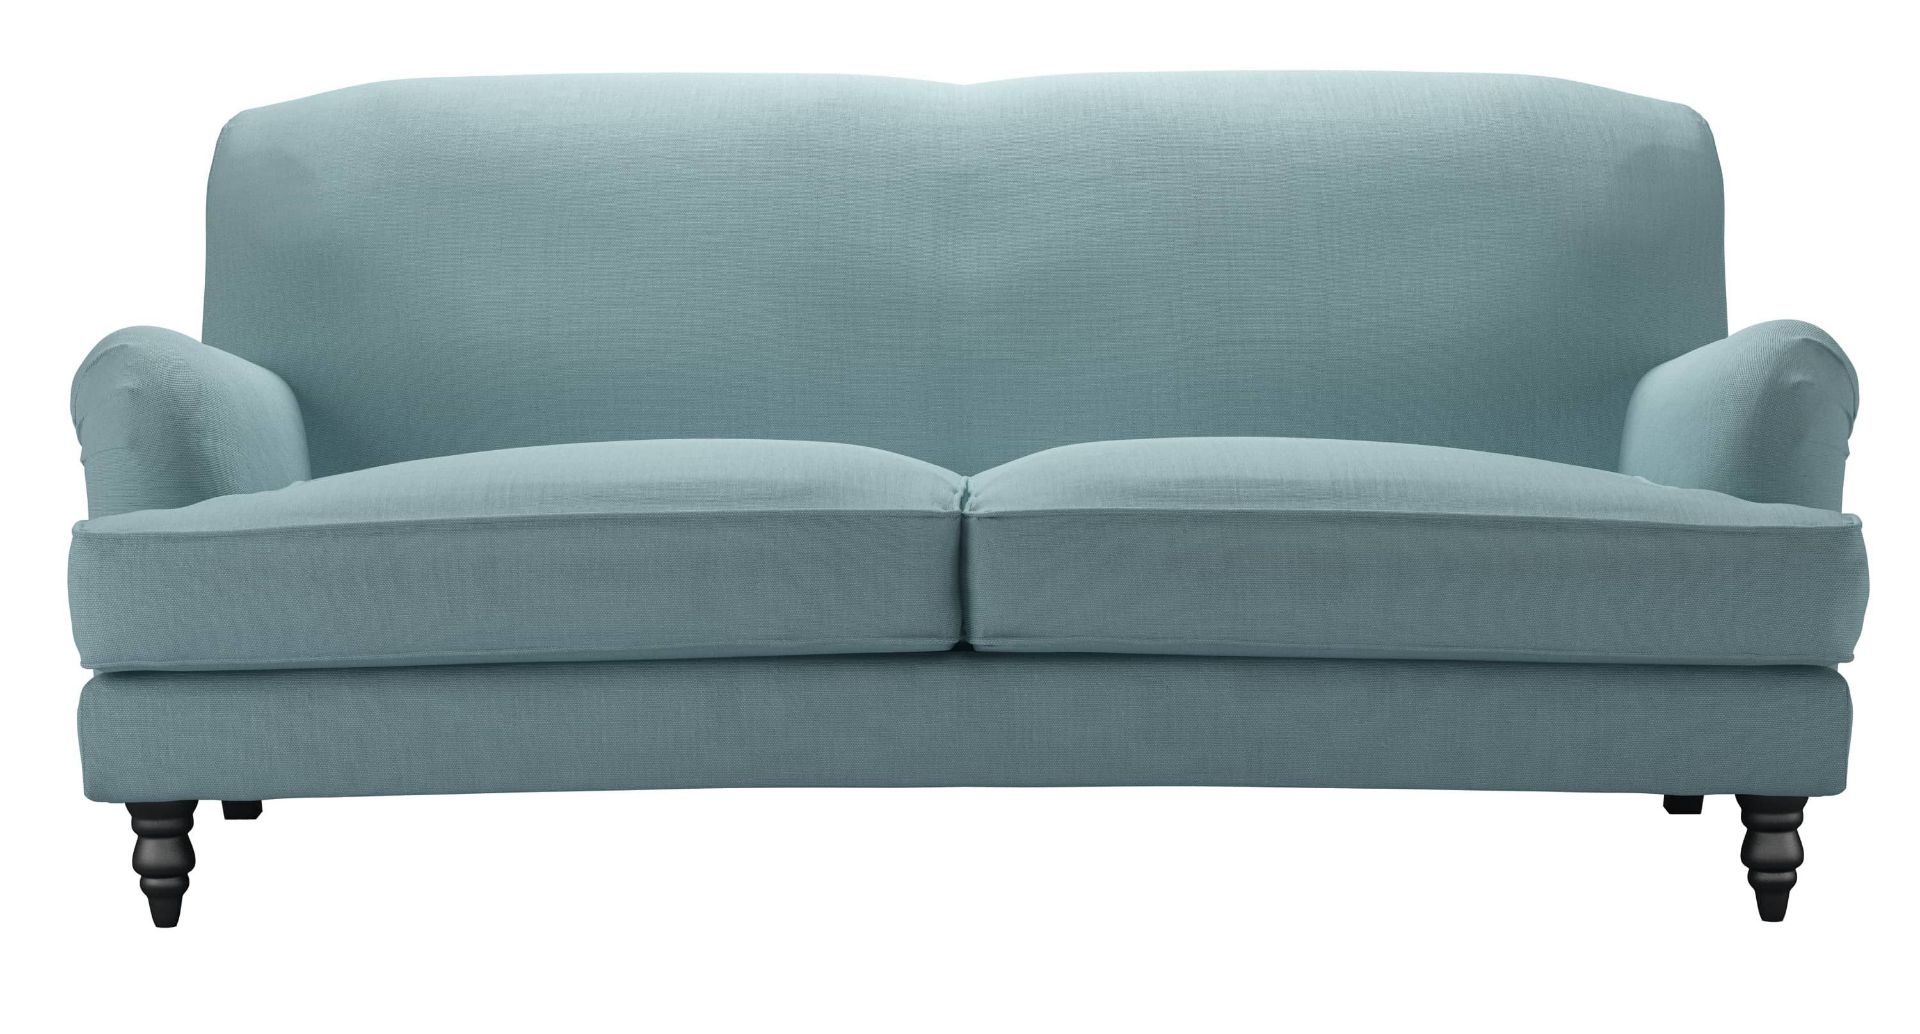 Snowdrop 3 Seat Sofa In Lagoon Brushed Linen Cotton RRP - £1870